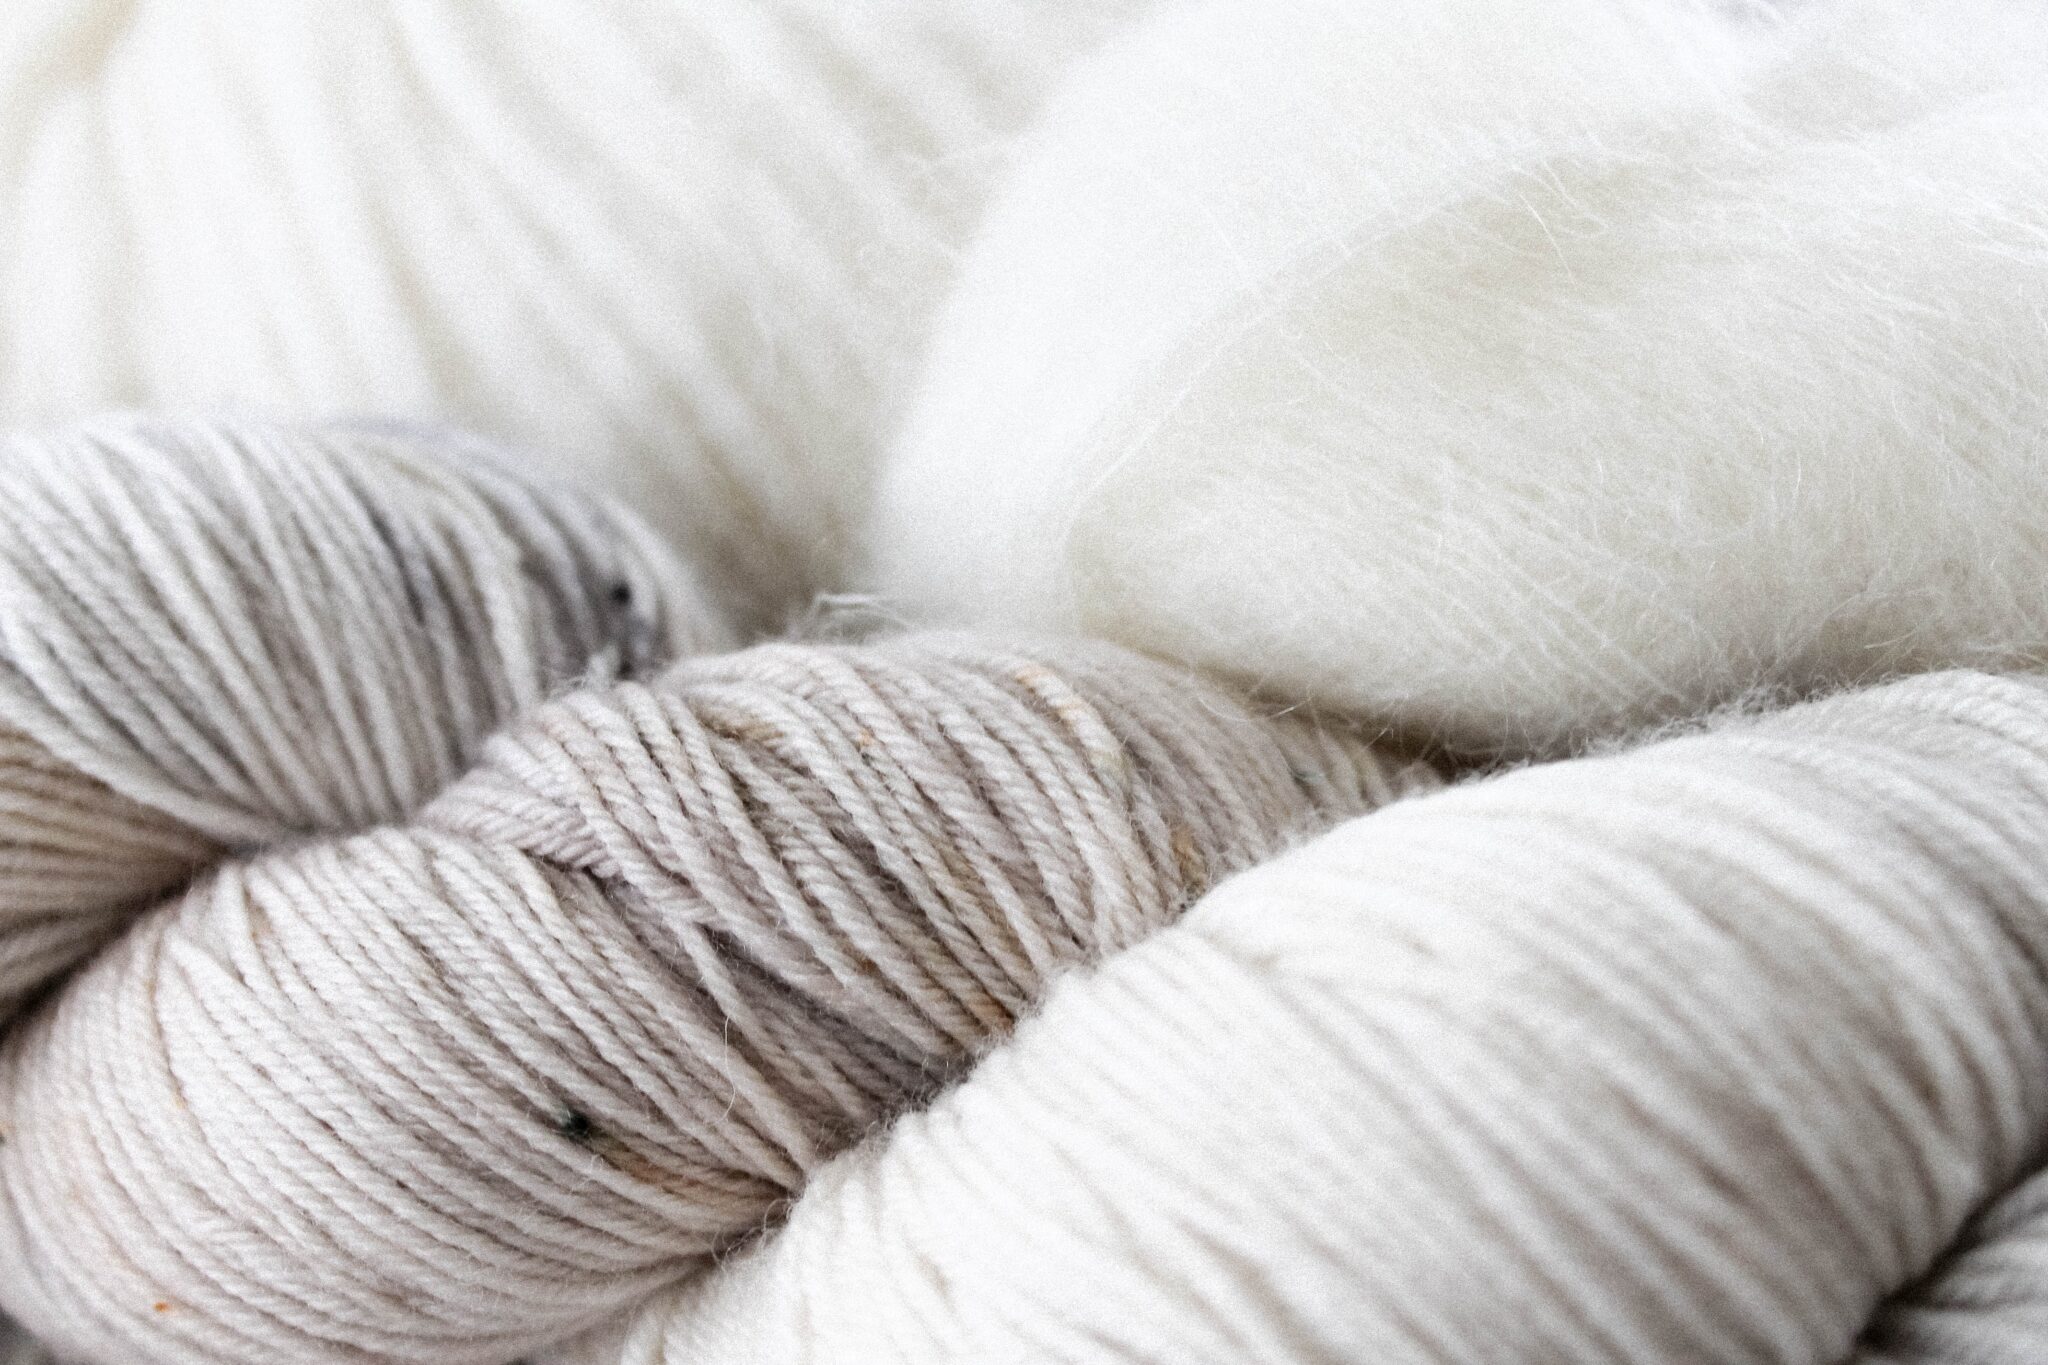 White and grey yarn and wool.